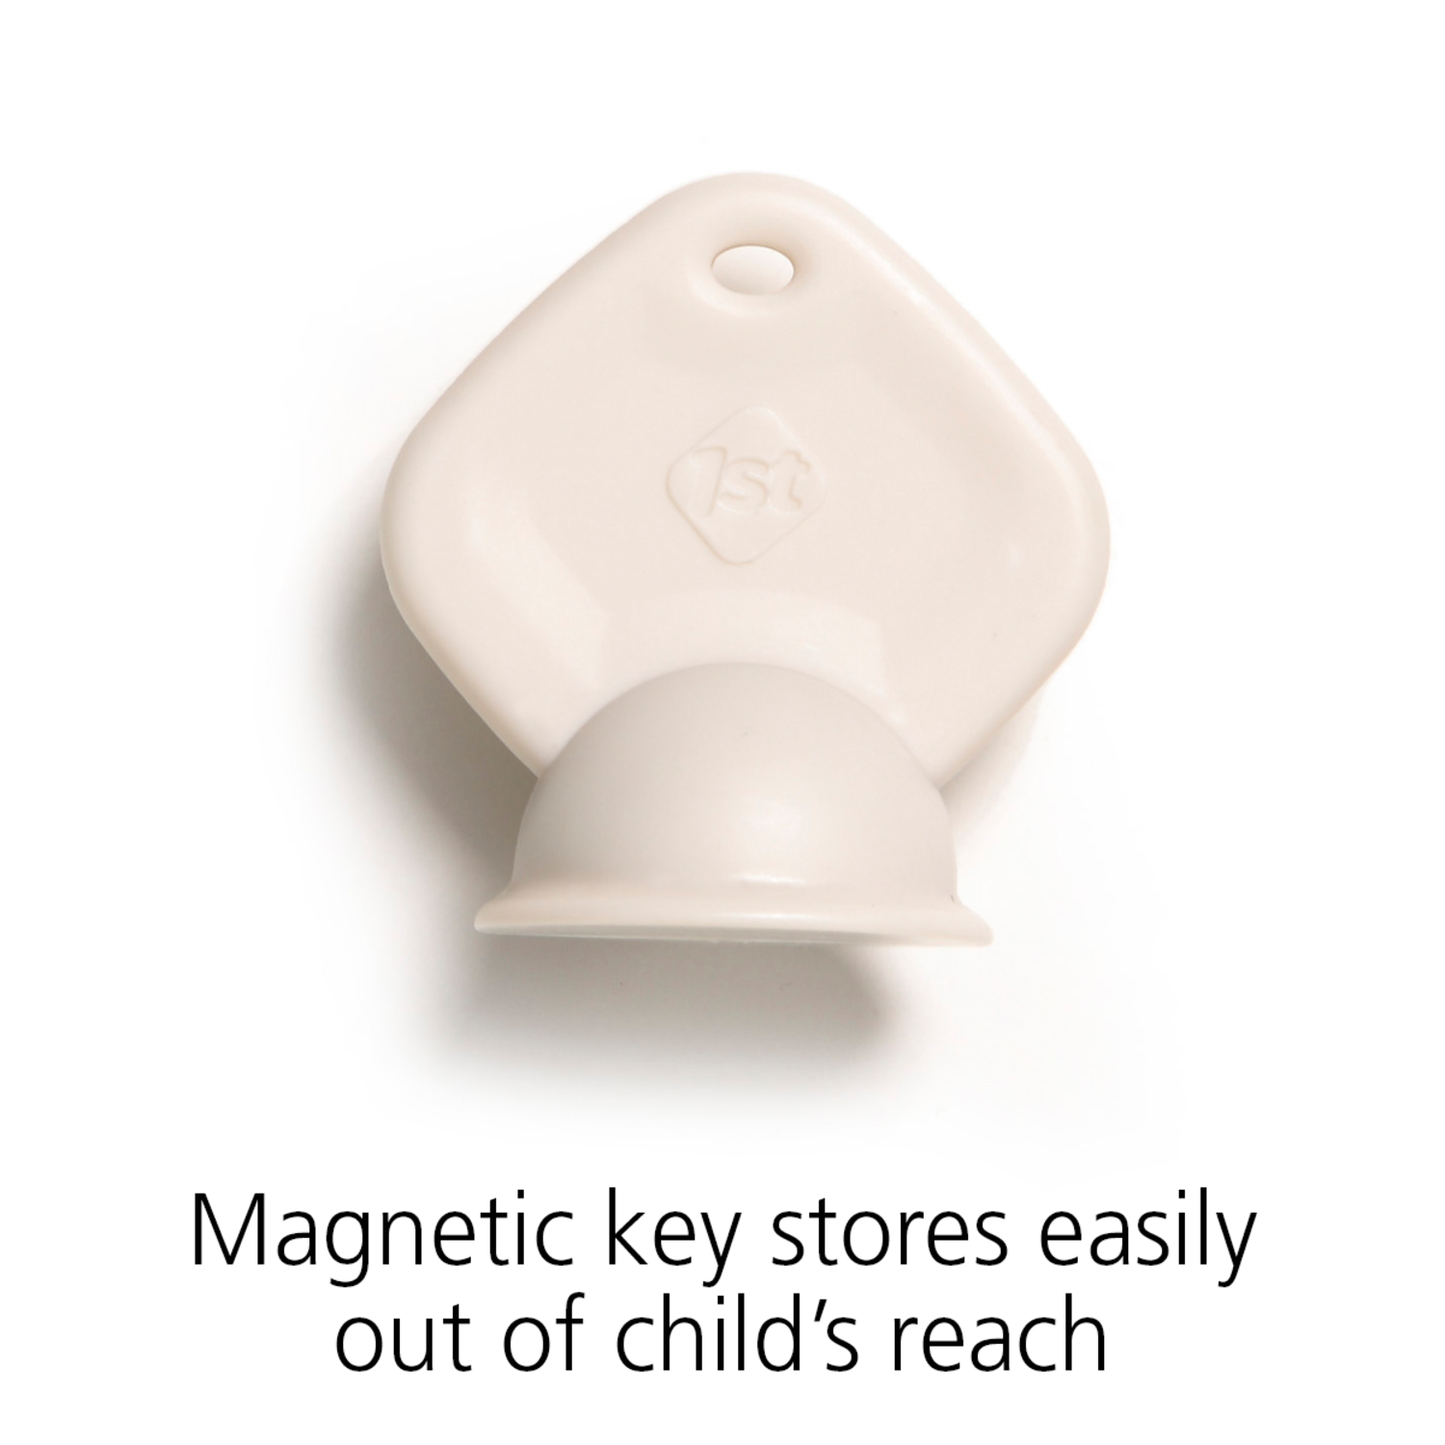 Safety 1ˢᵗ Deluxe Magnetic Safety Locking System